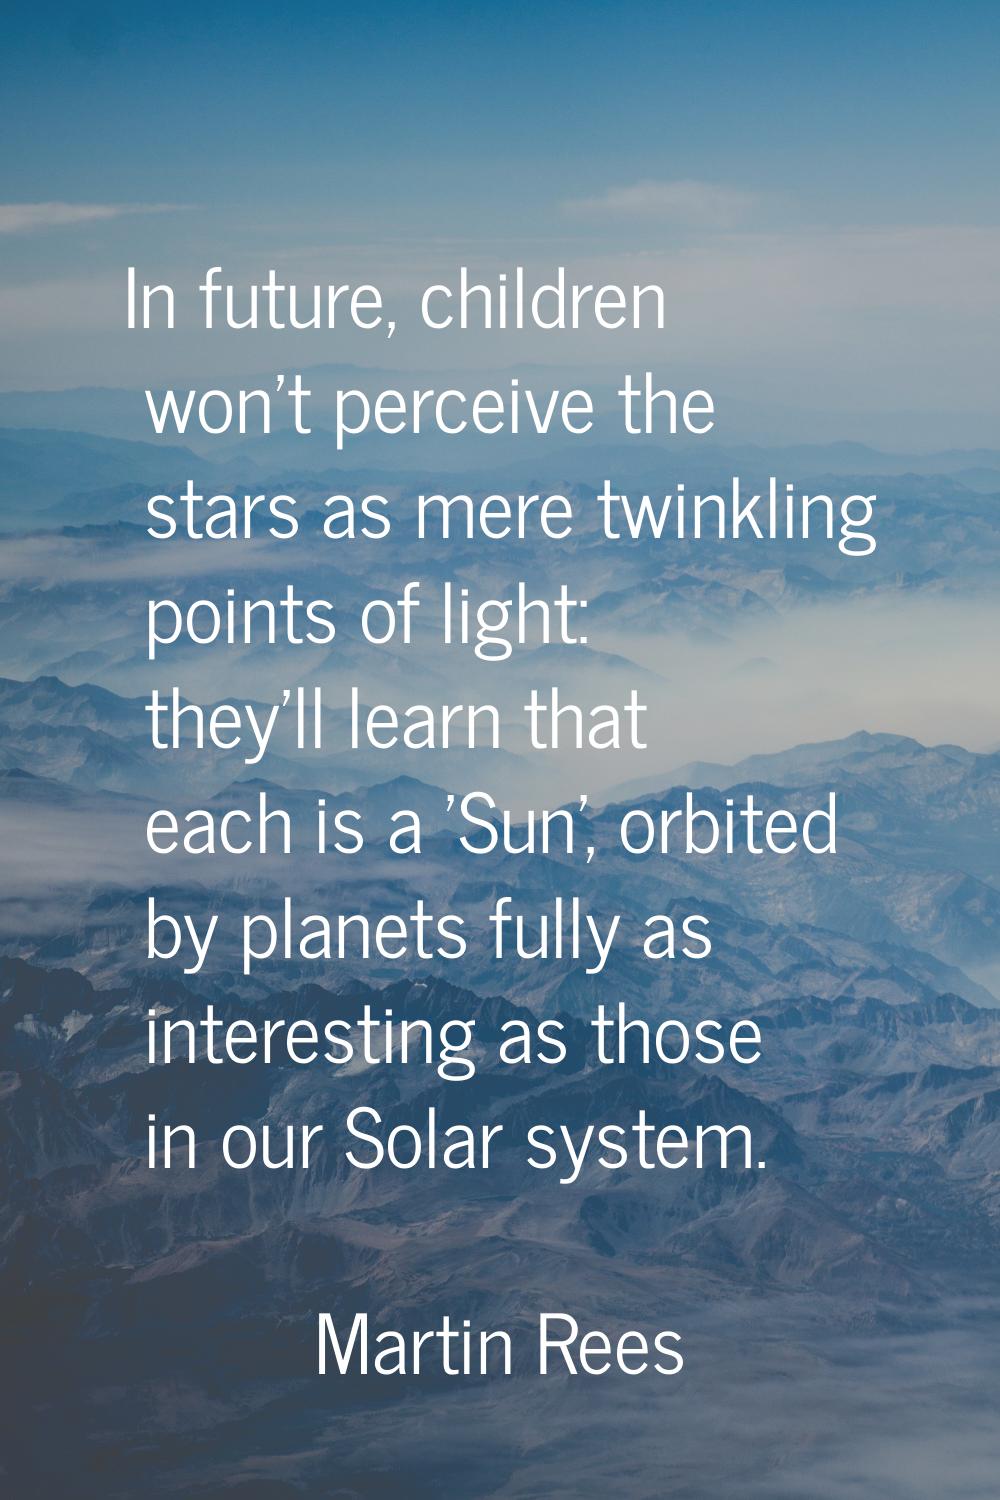 In future, children won't perceive the stars as mere twinkling points of light: they'll learn that 